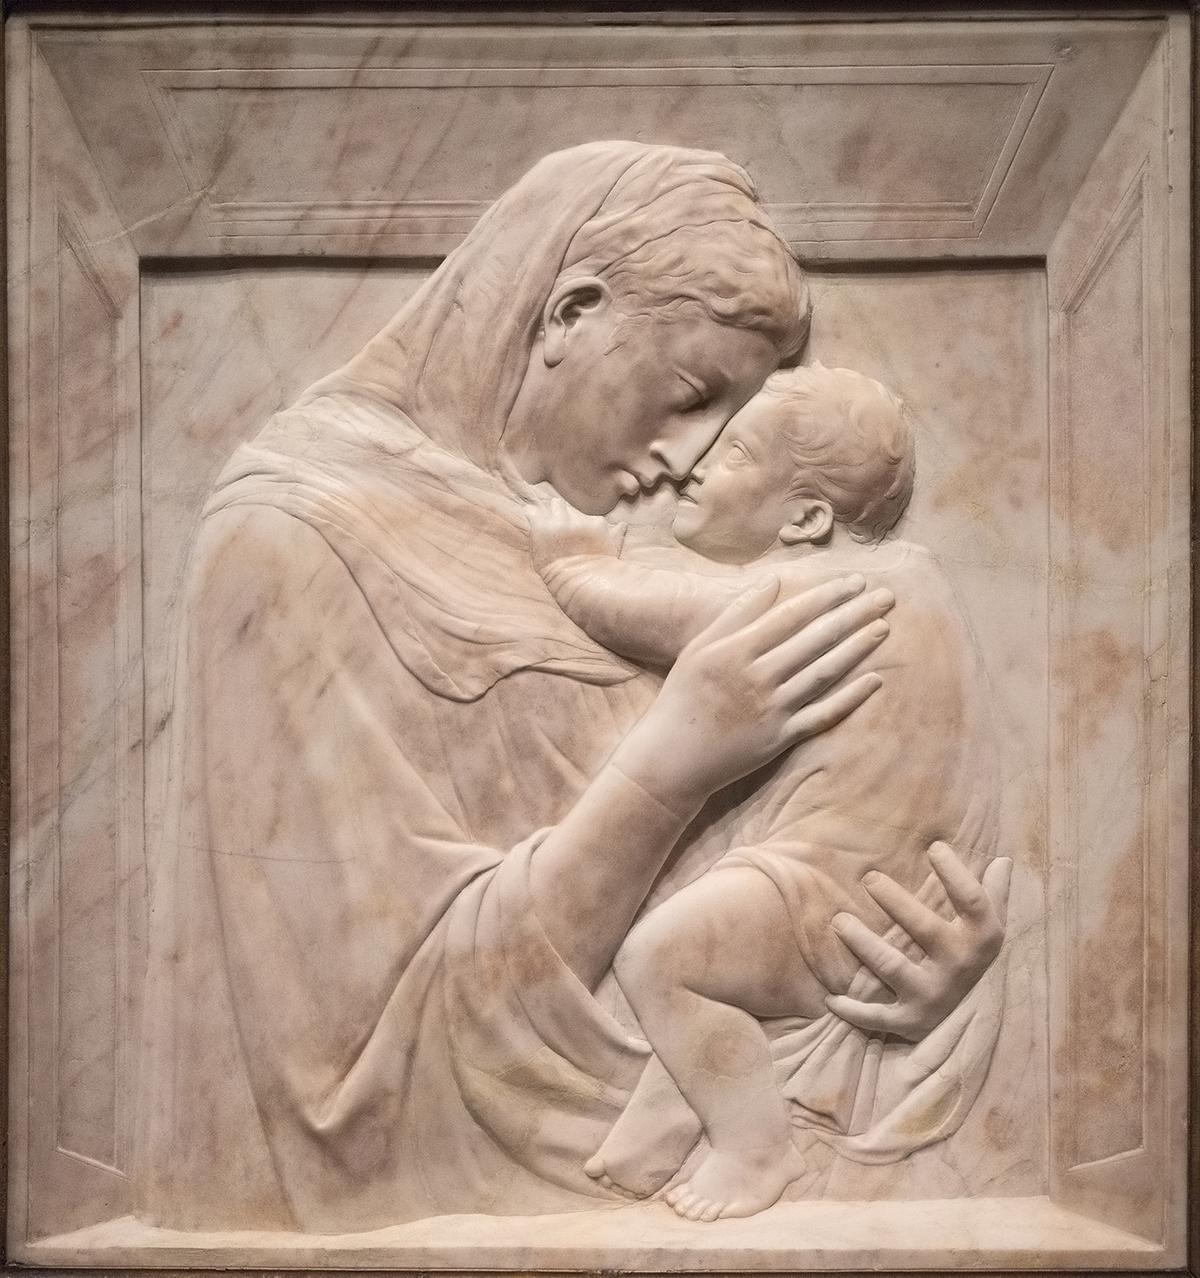 "Pazzi-Madonna," circa 1422, by Donatello. Marble. Bode-Museum, Berlin (<a href="https://commons.wikimedia.org/wiki/File:Donatello,_Pazzi-Madonna,_c1422,_Bode_Museum,_Berlin_wof.jpg">MenkinAlRire</a>/<a href="https://creativecommons.org/licenses/by-sa/4.0/deed.en">CC BY-SA 4.0 DEED</a>)